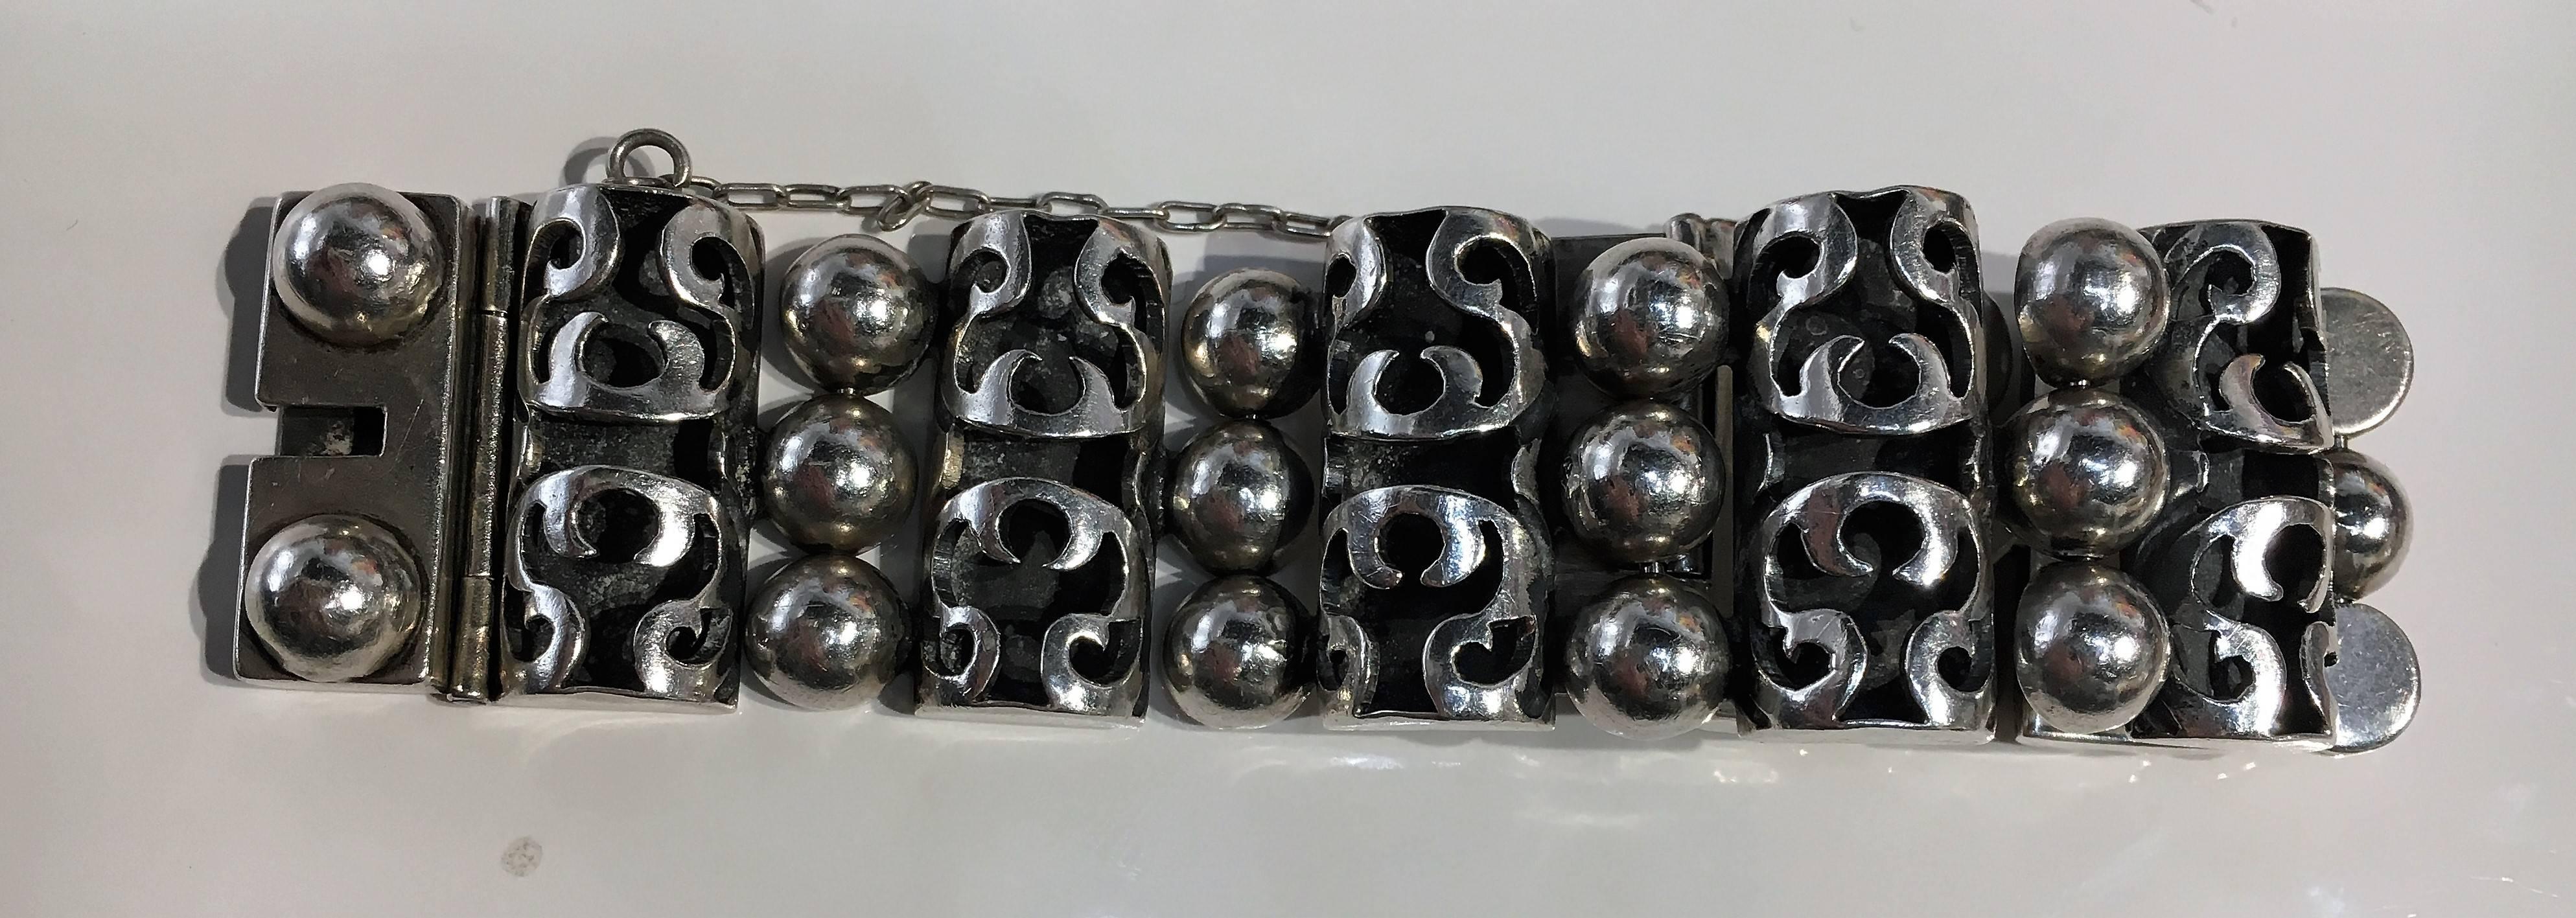 20th Century Vintage 1940s Sterling Silver Bracelet by Victoria